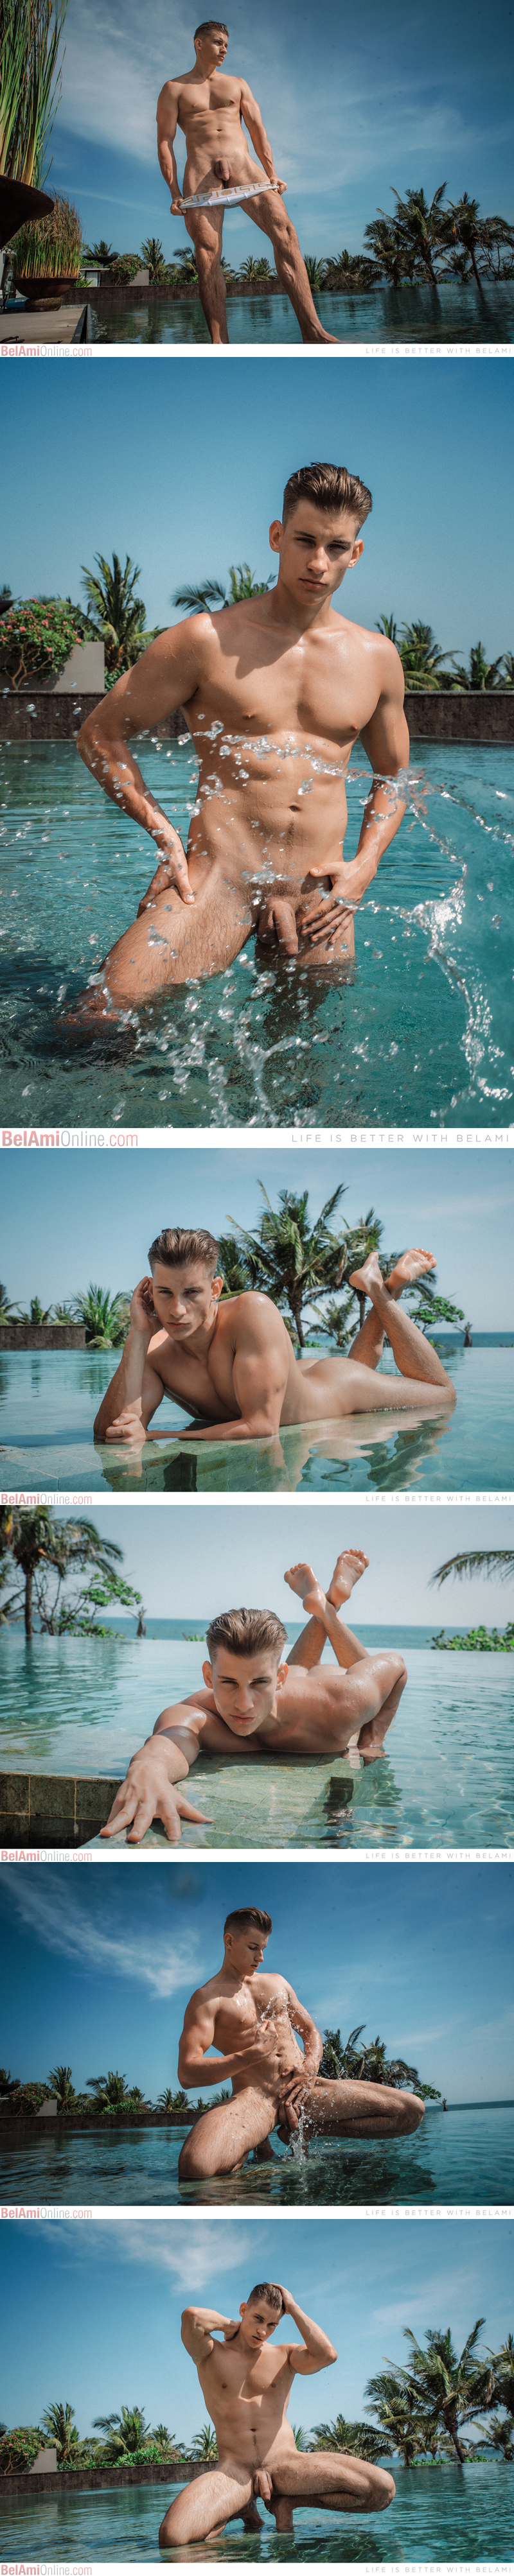 Ritchie Argento [Model of the Week Pin-up] at BelAmiOnline